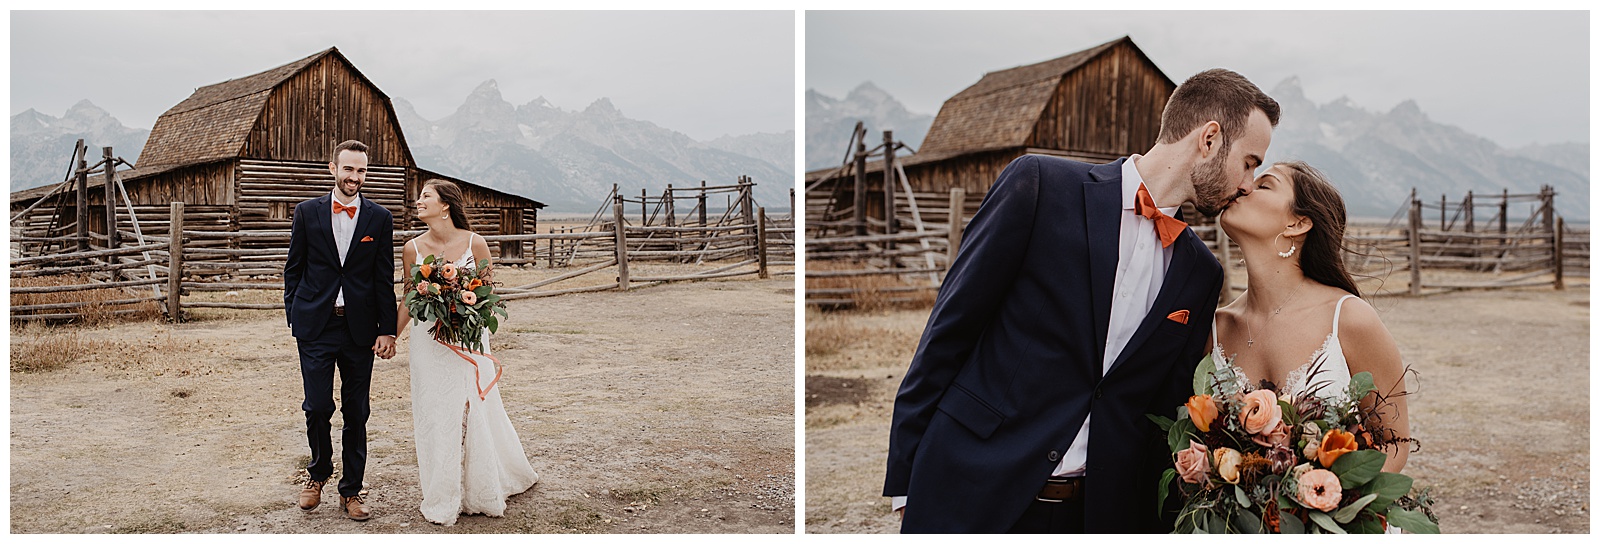 Grand Teton wedding in the fall with the bride and groom next to an old farm house kissing and holding hands